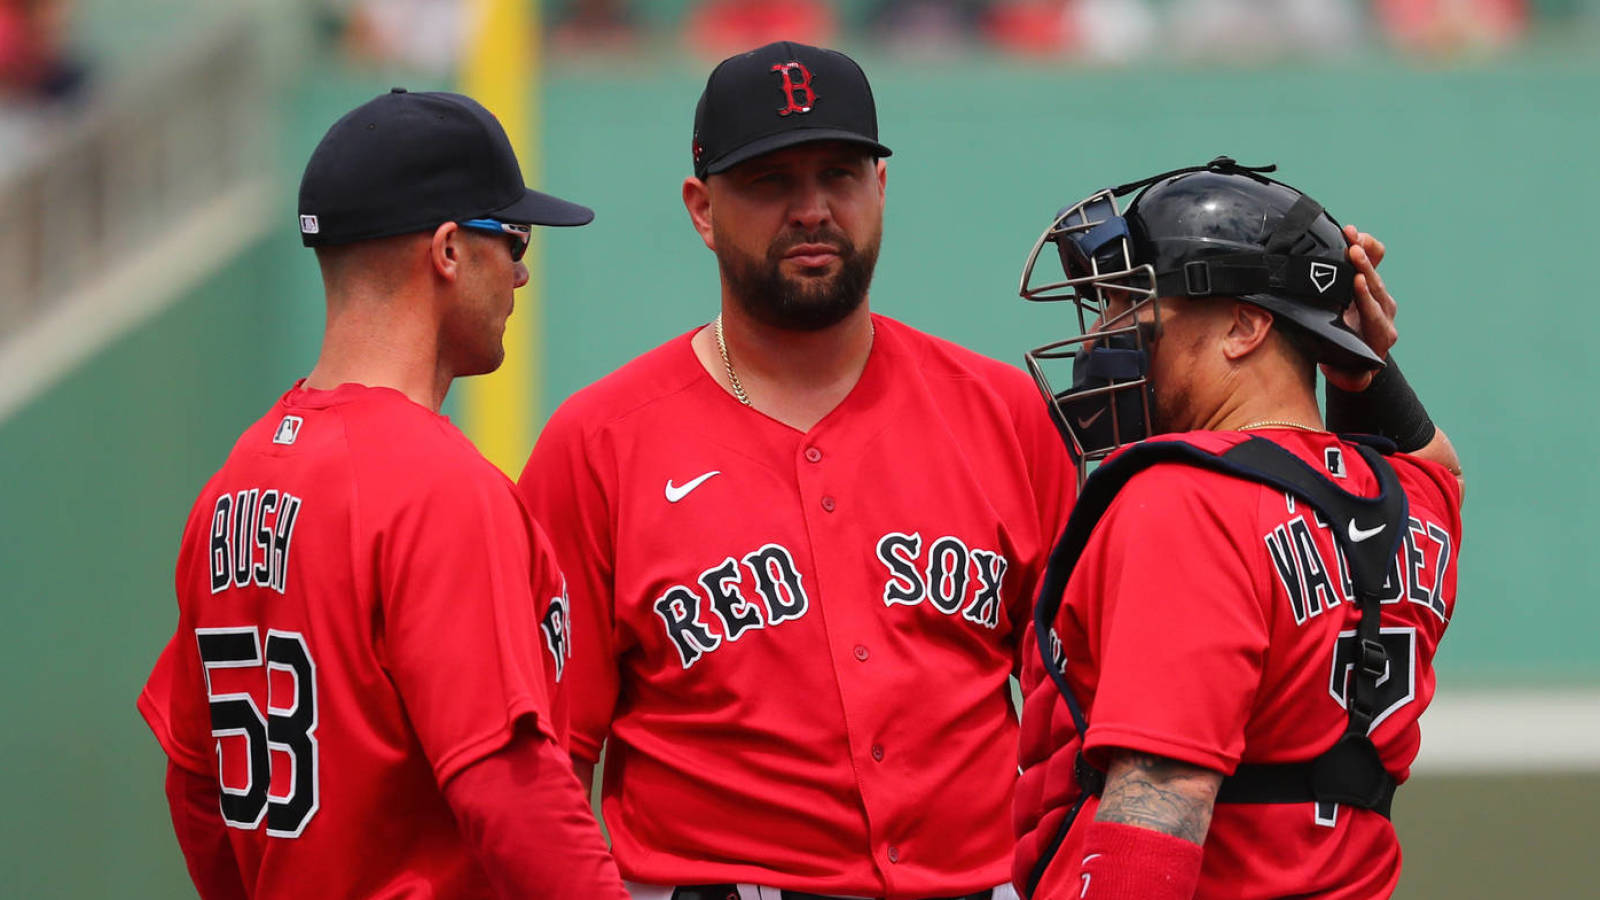 Red Sox eyeing 'new and different concepts' for uniforms